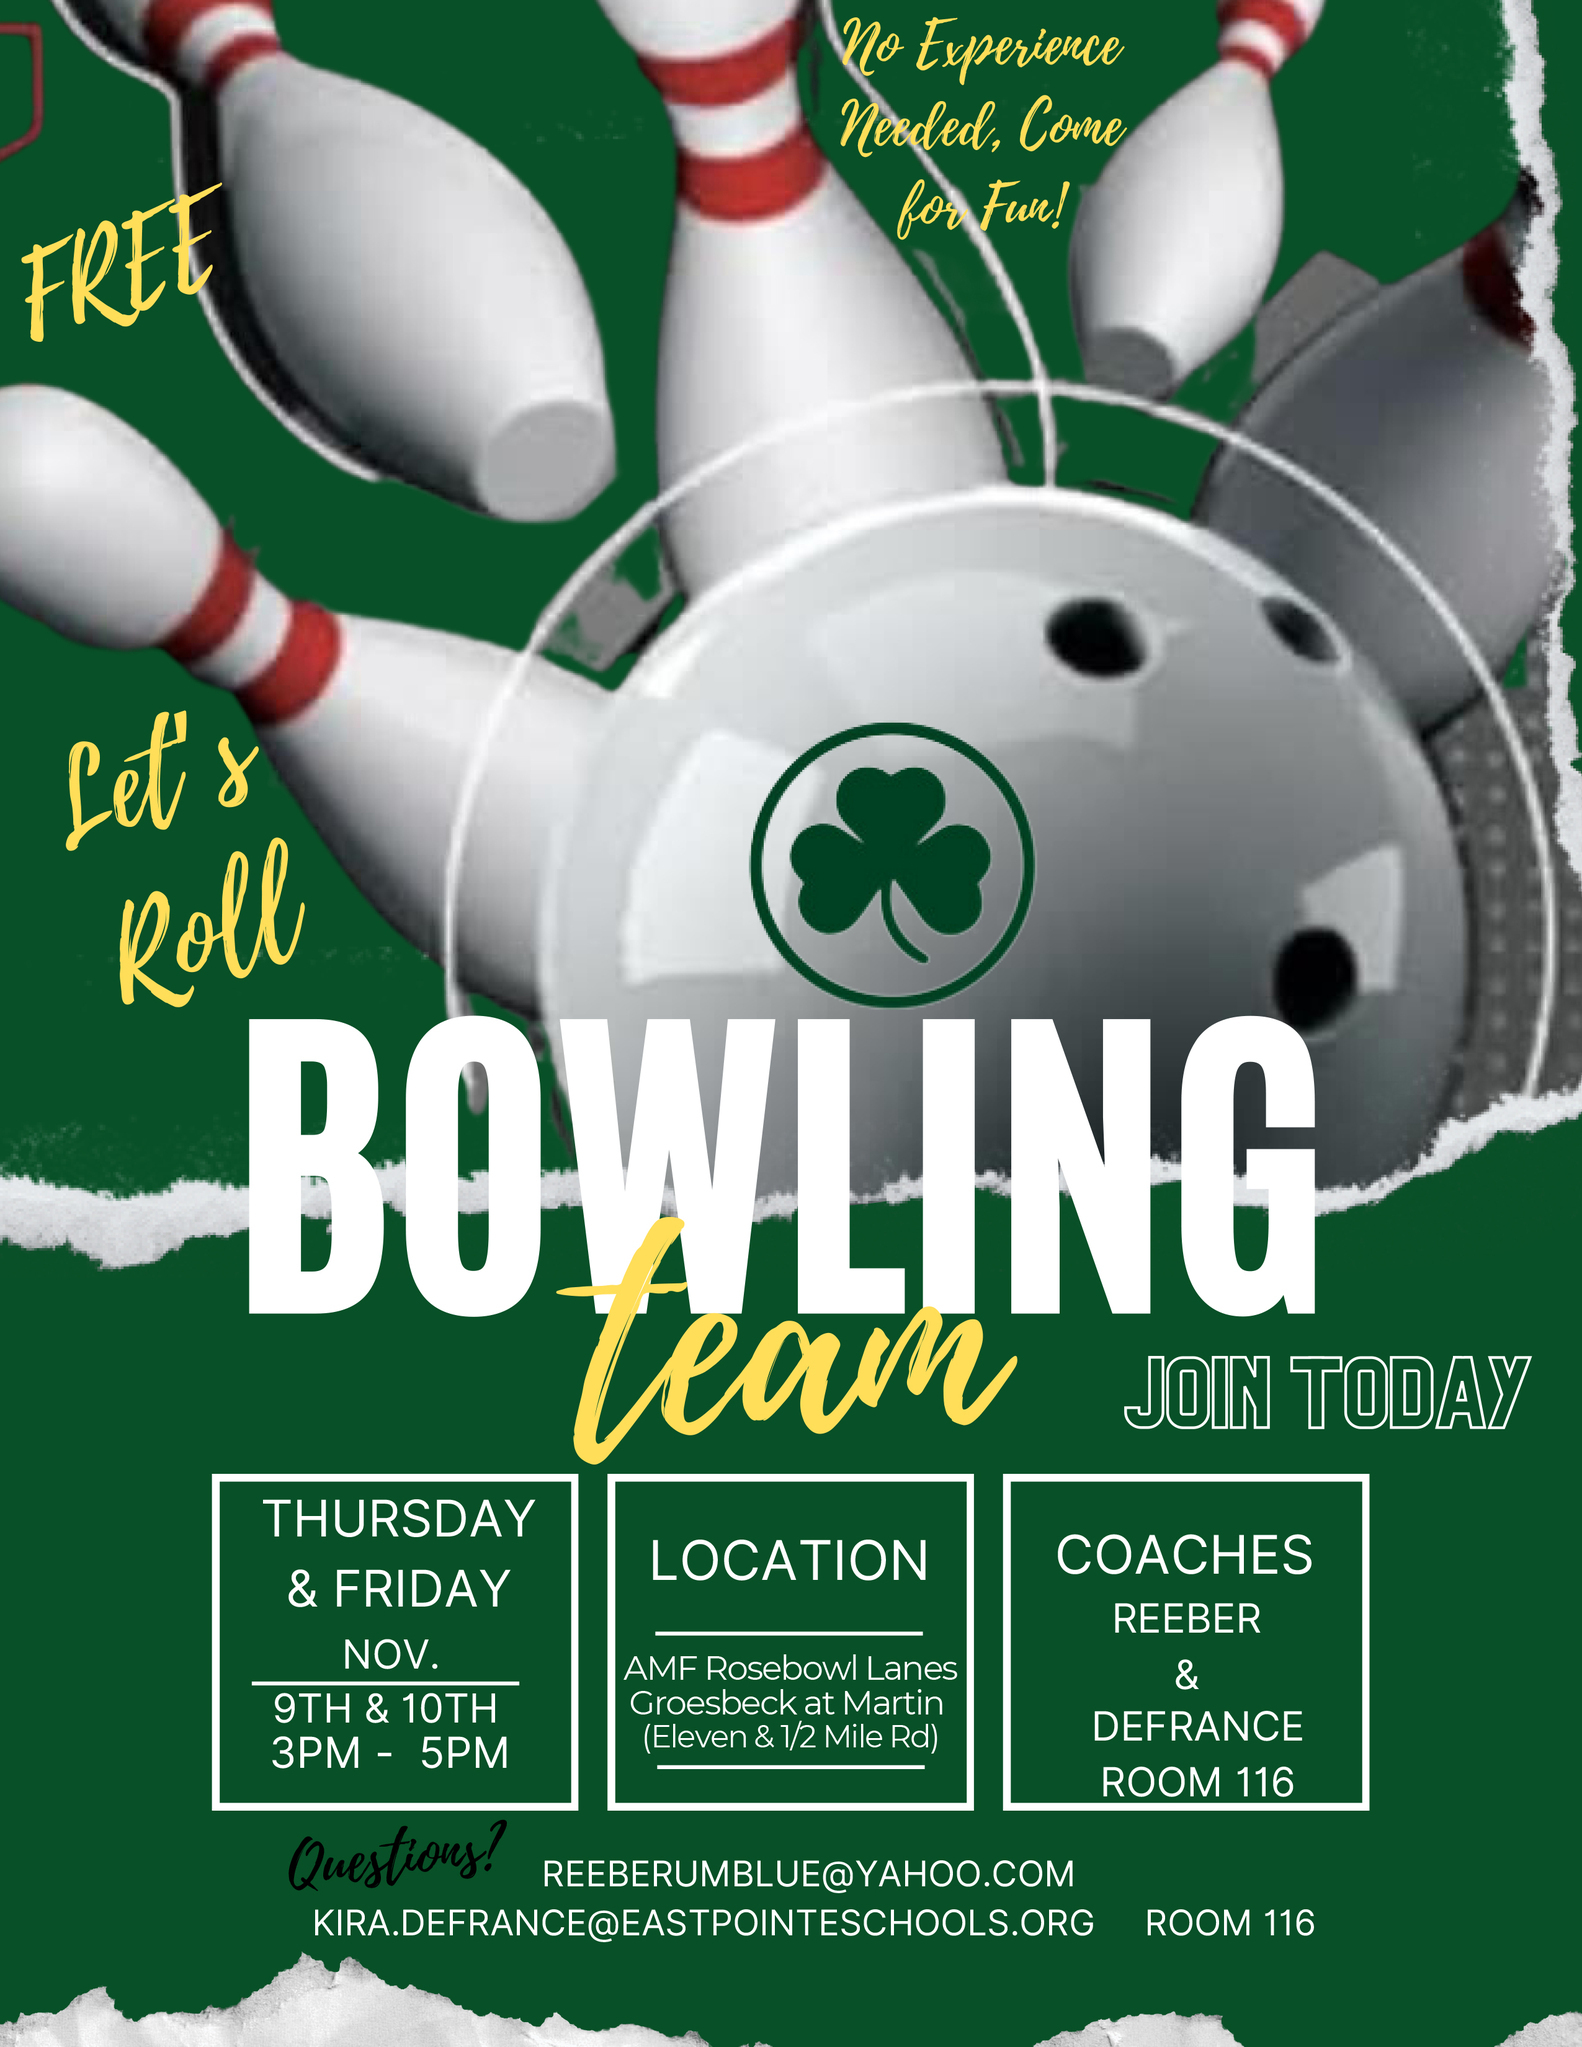 High school bowling tryouts flier - November 9 and 10 from 3-5pm at Rosebowl Lanes